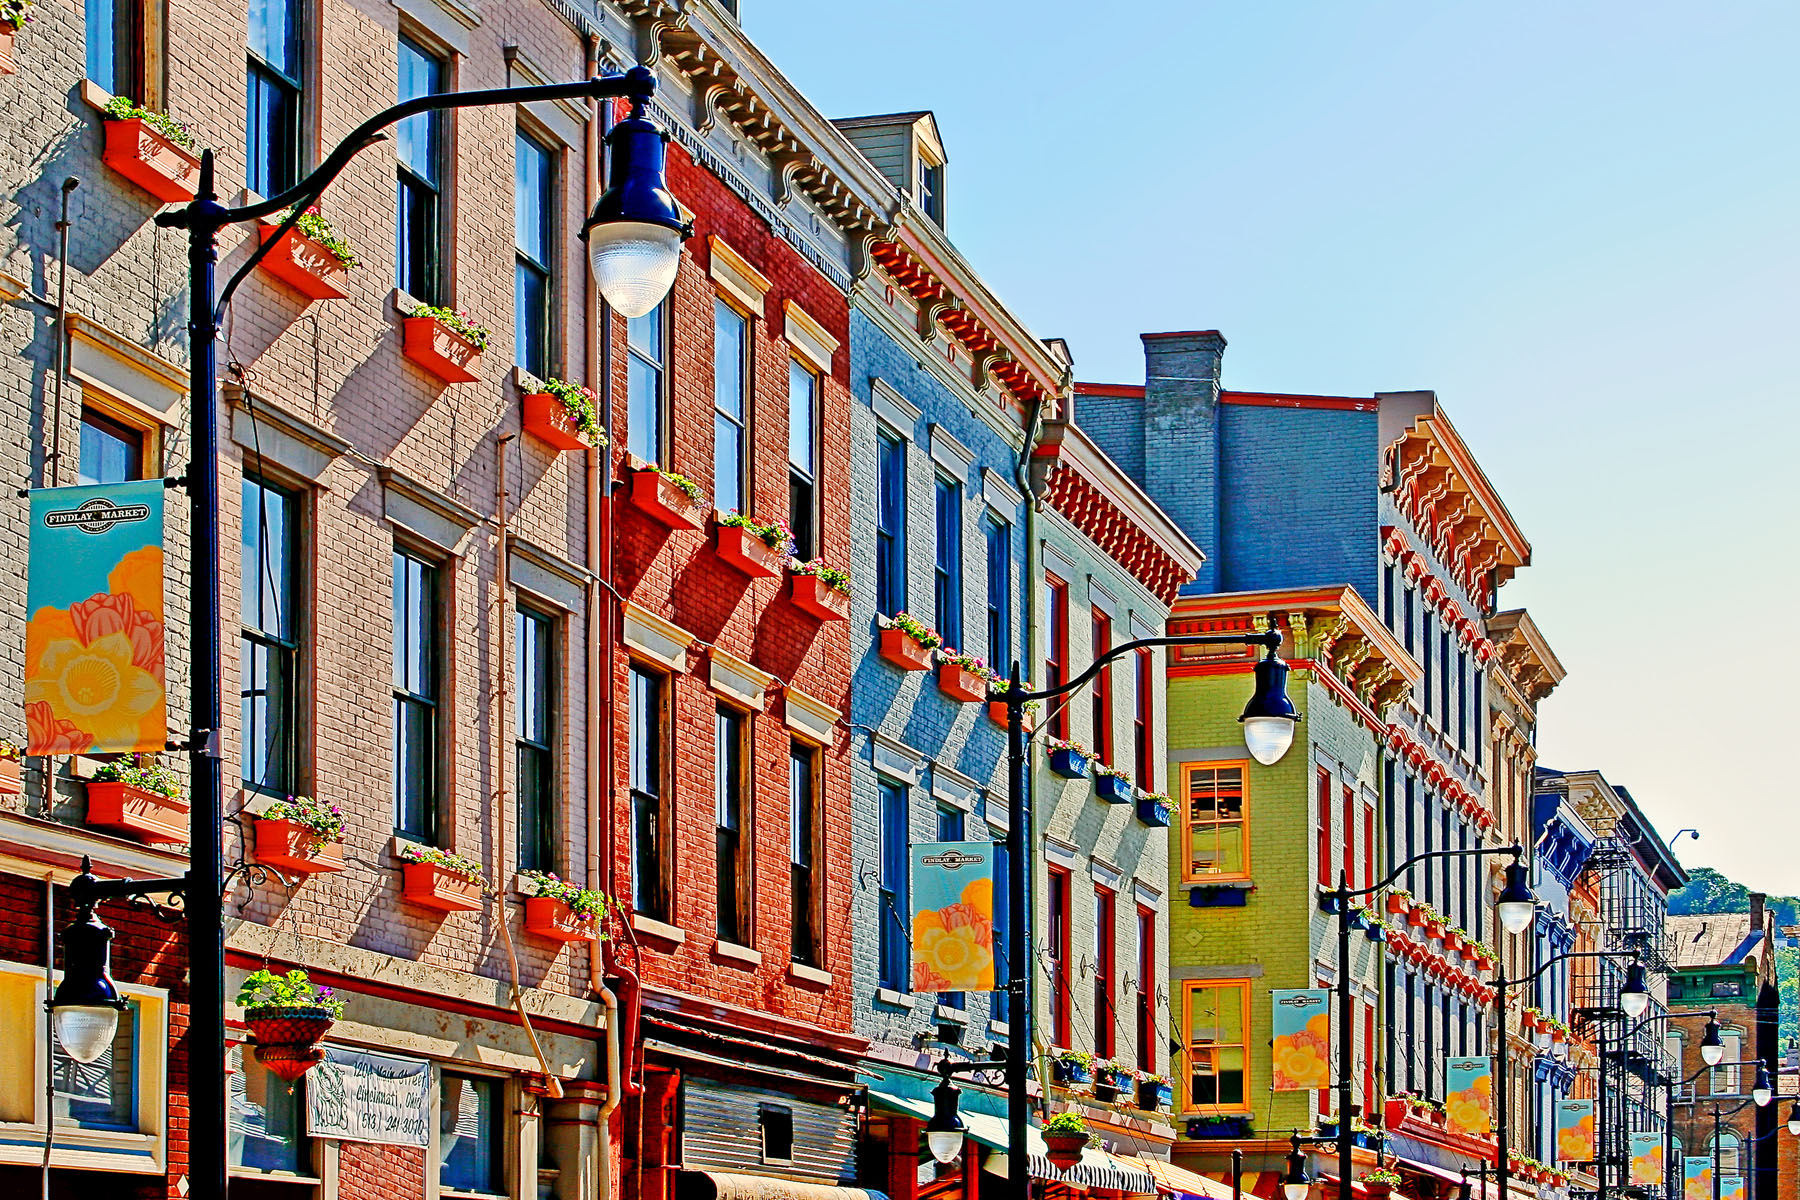 NEXT TO FINDLAY - My wife and I happened to go to Findlay Market the first time they opened on Sunday. The city had spent money dressing up the exterior of the buildings and the sun was shining. It was a beautiful day. I was glad I had my camera.